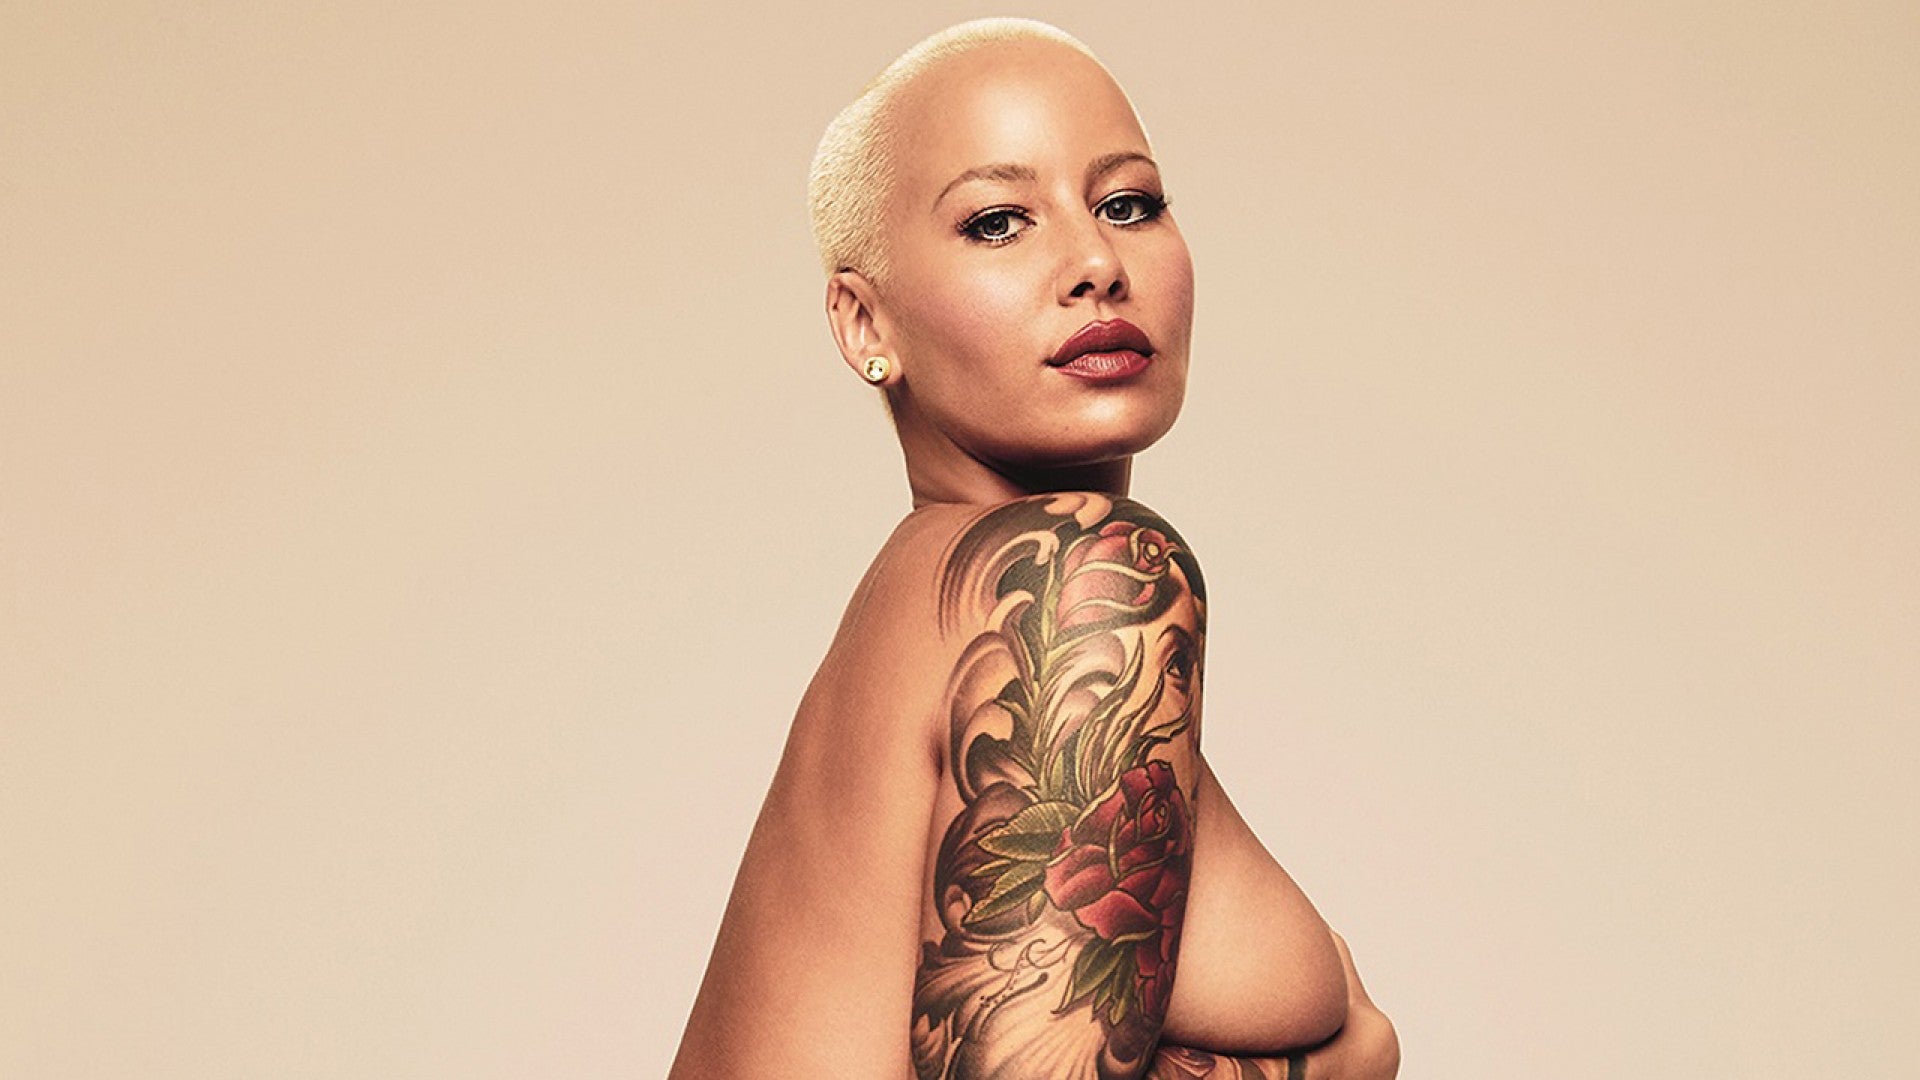 Amber rose new nude